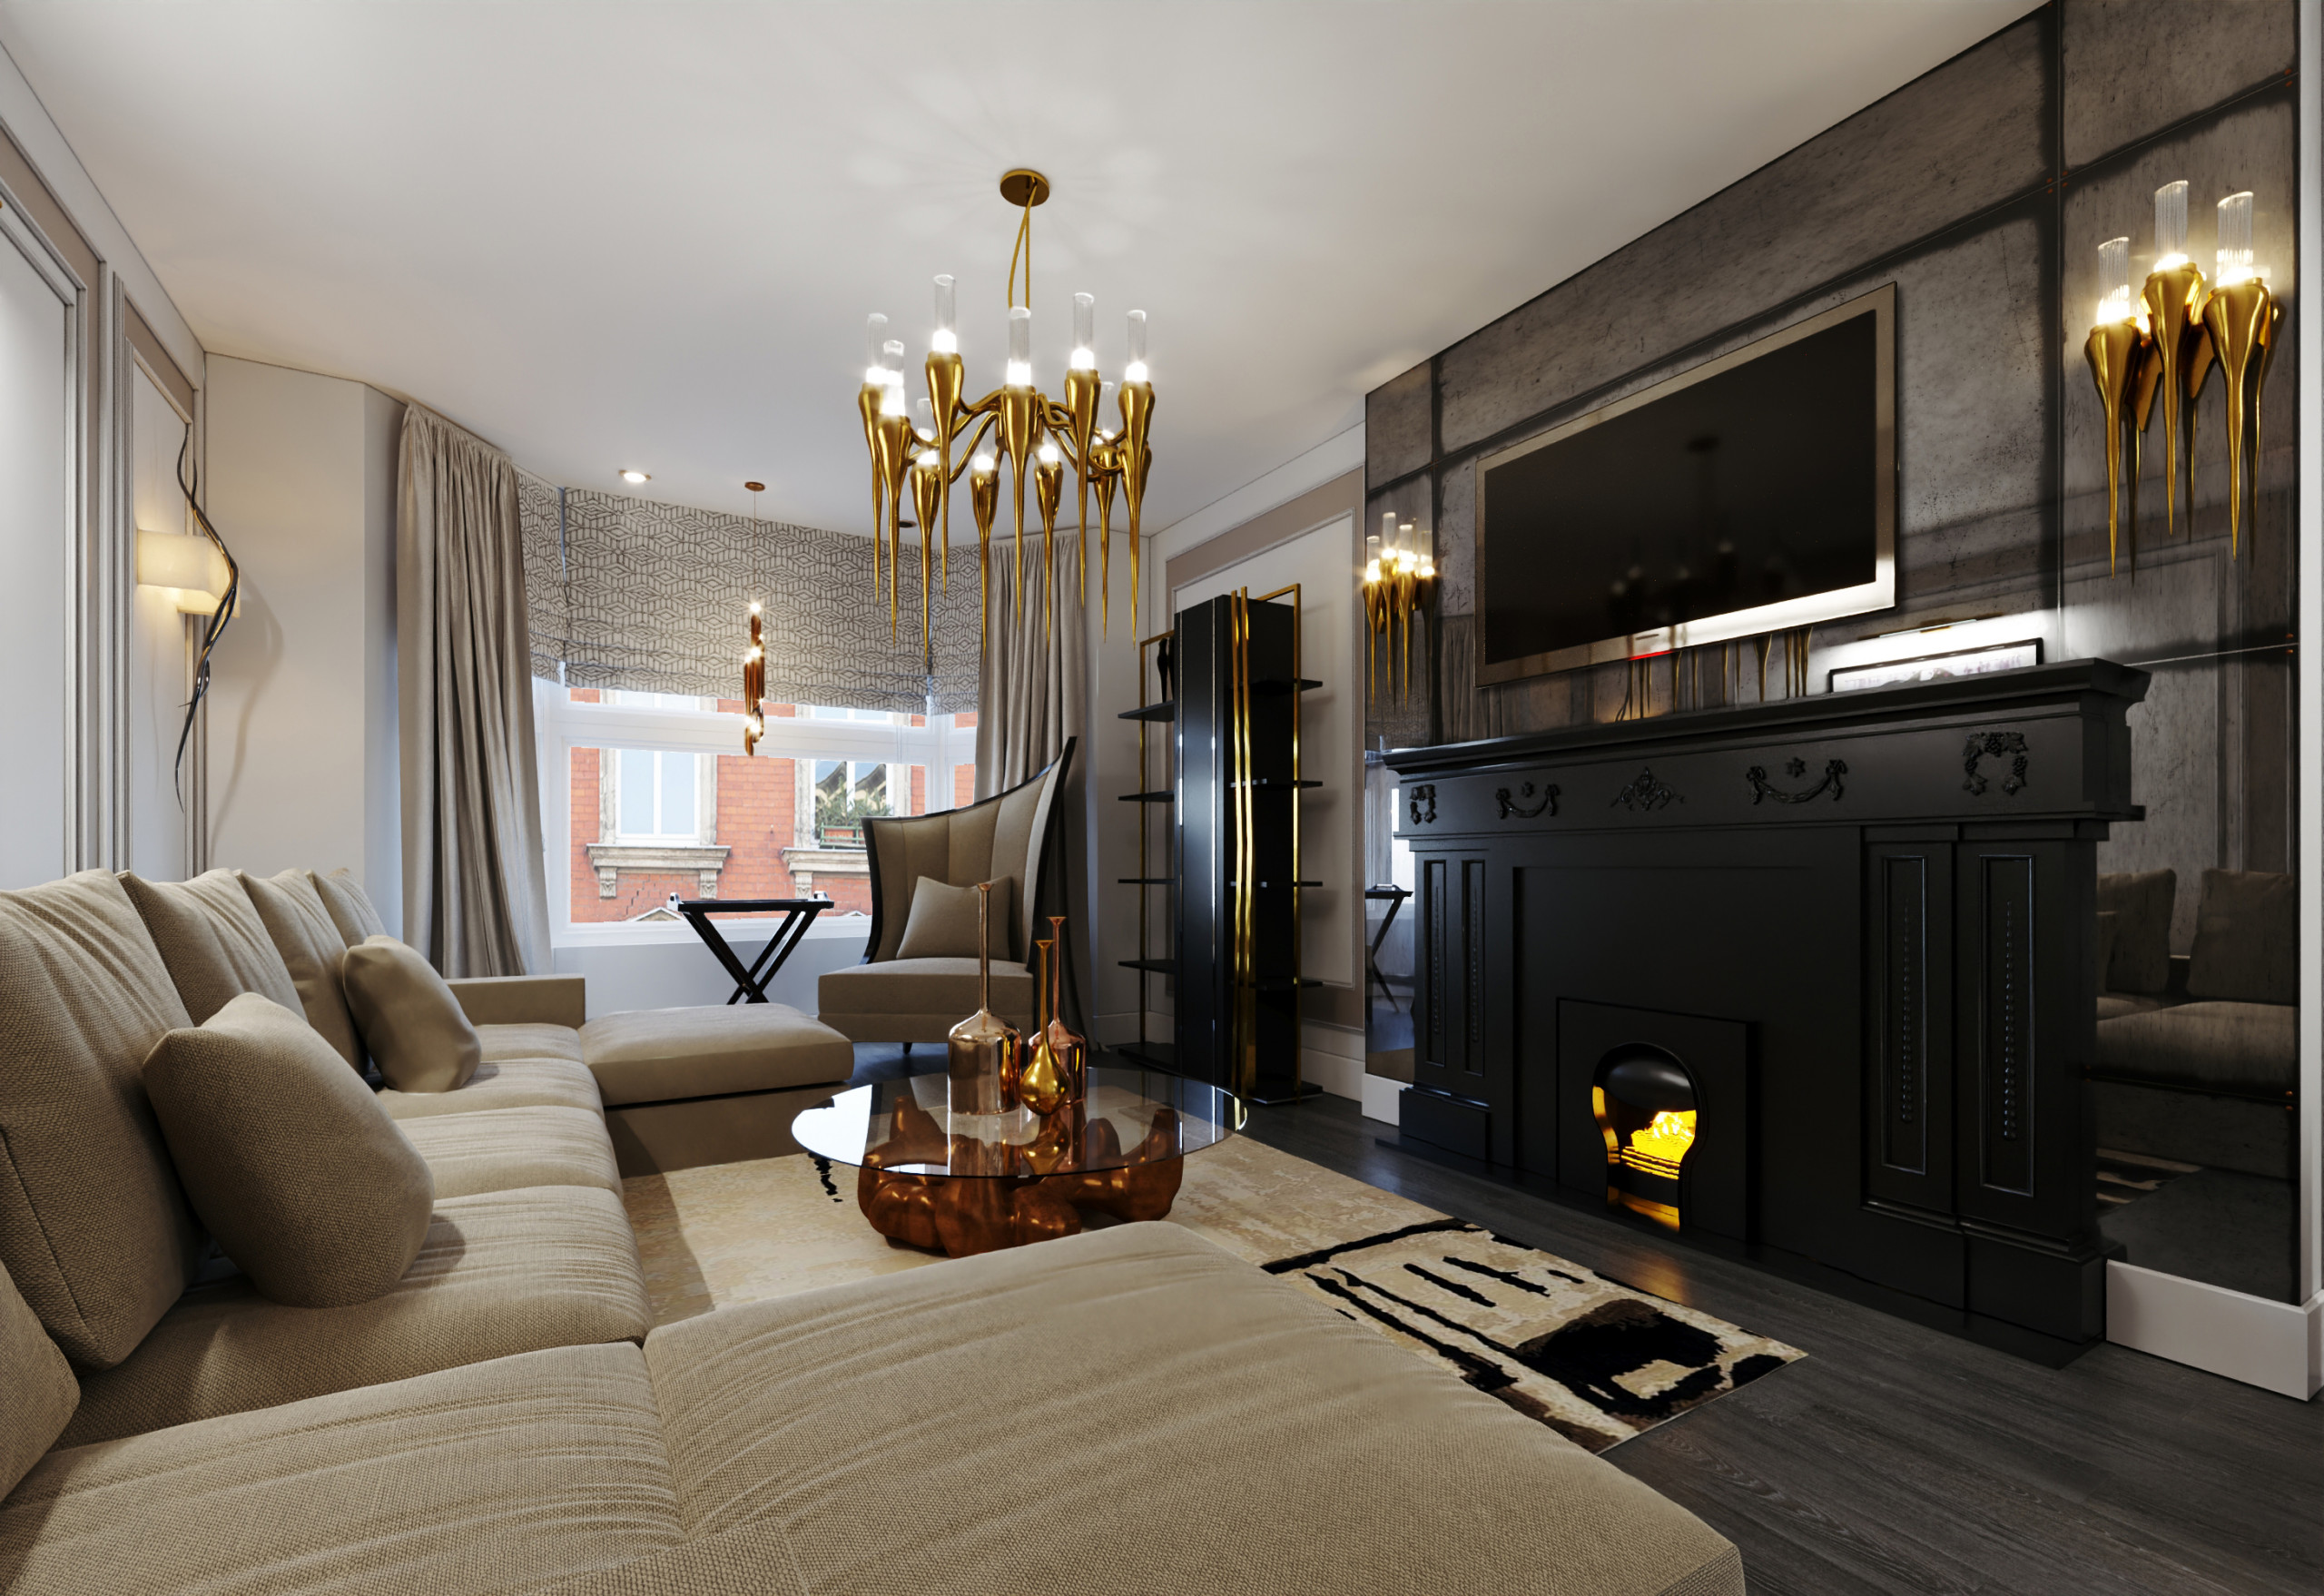 The client wanted to have a comfortable, bright, and cosy environment with a touch of luxury.